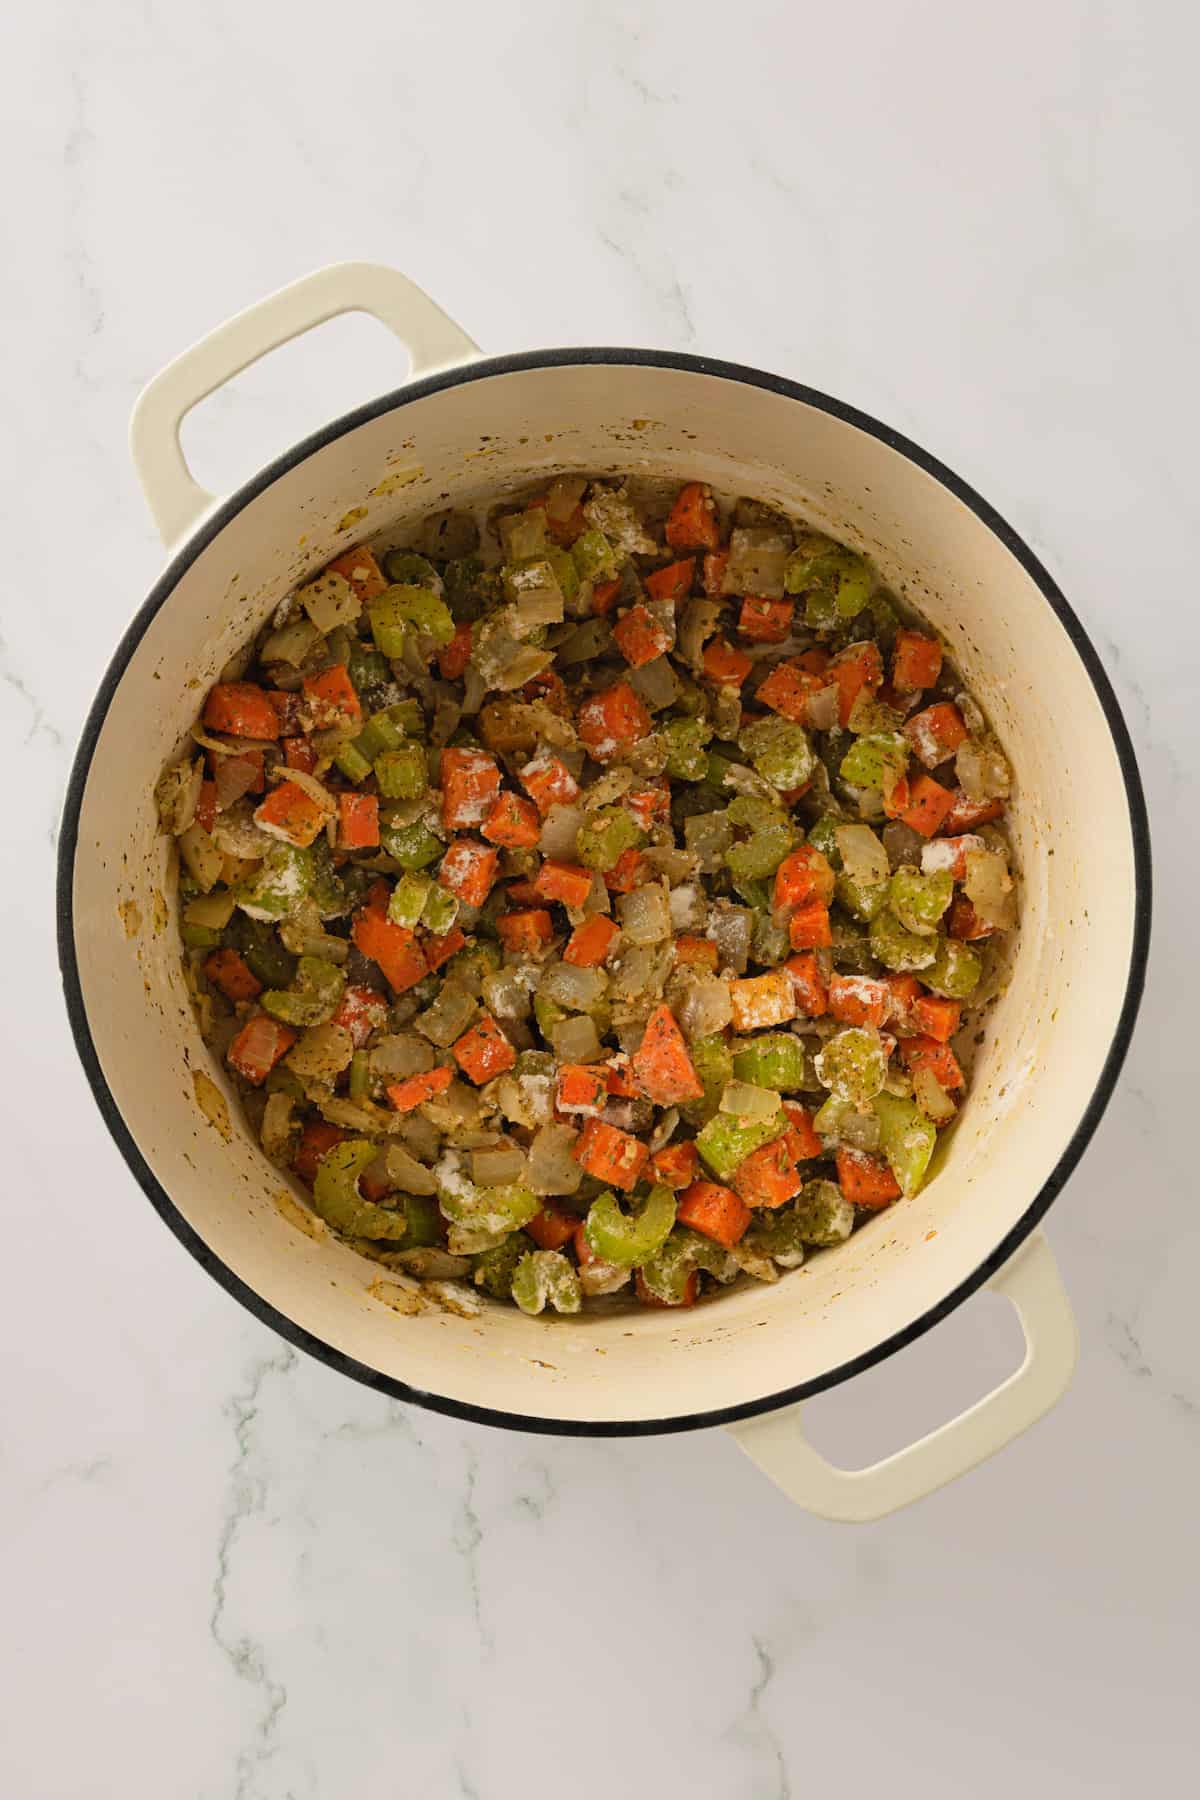 Overhead view of cooked vegetables and flour in Dutch oven